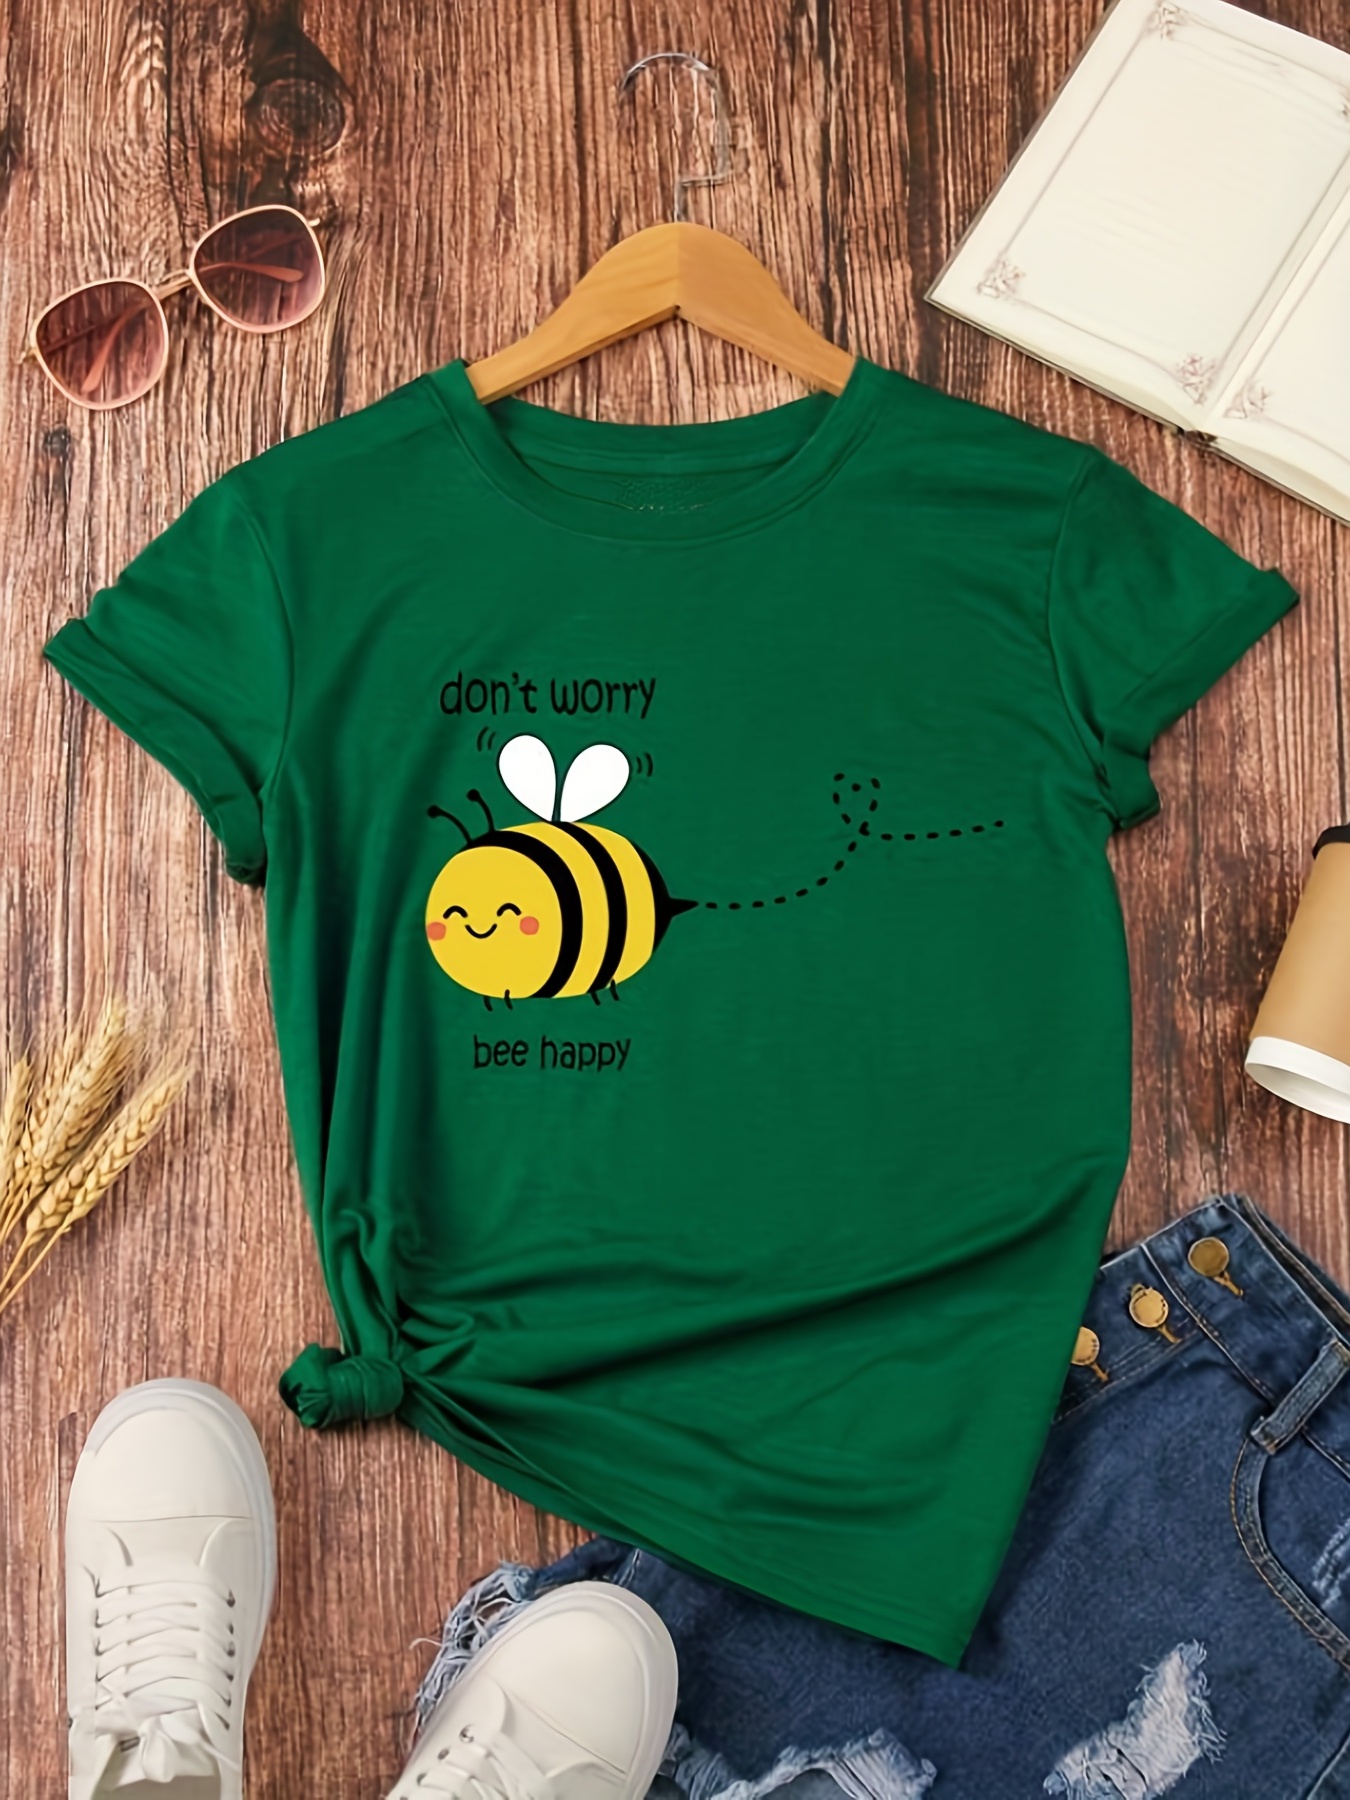 Dropship Let It Bee T-shirt, Boho Shirt For Women, Inspirational Shirt,  Bumble Bees Gift, Mama Top, Bee Shirt, Cute Bees T-shirt, Bee Lover Gift to  Sell Online at a Lower Price